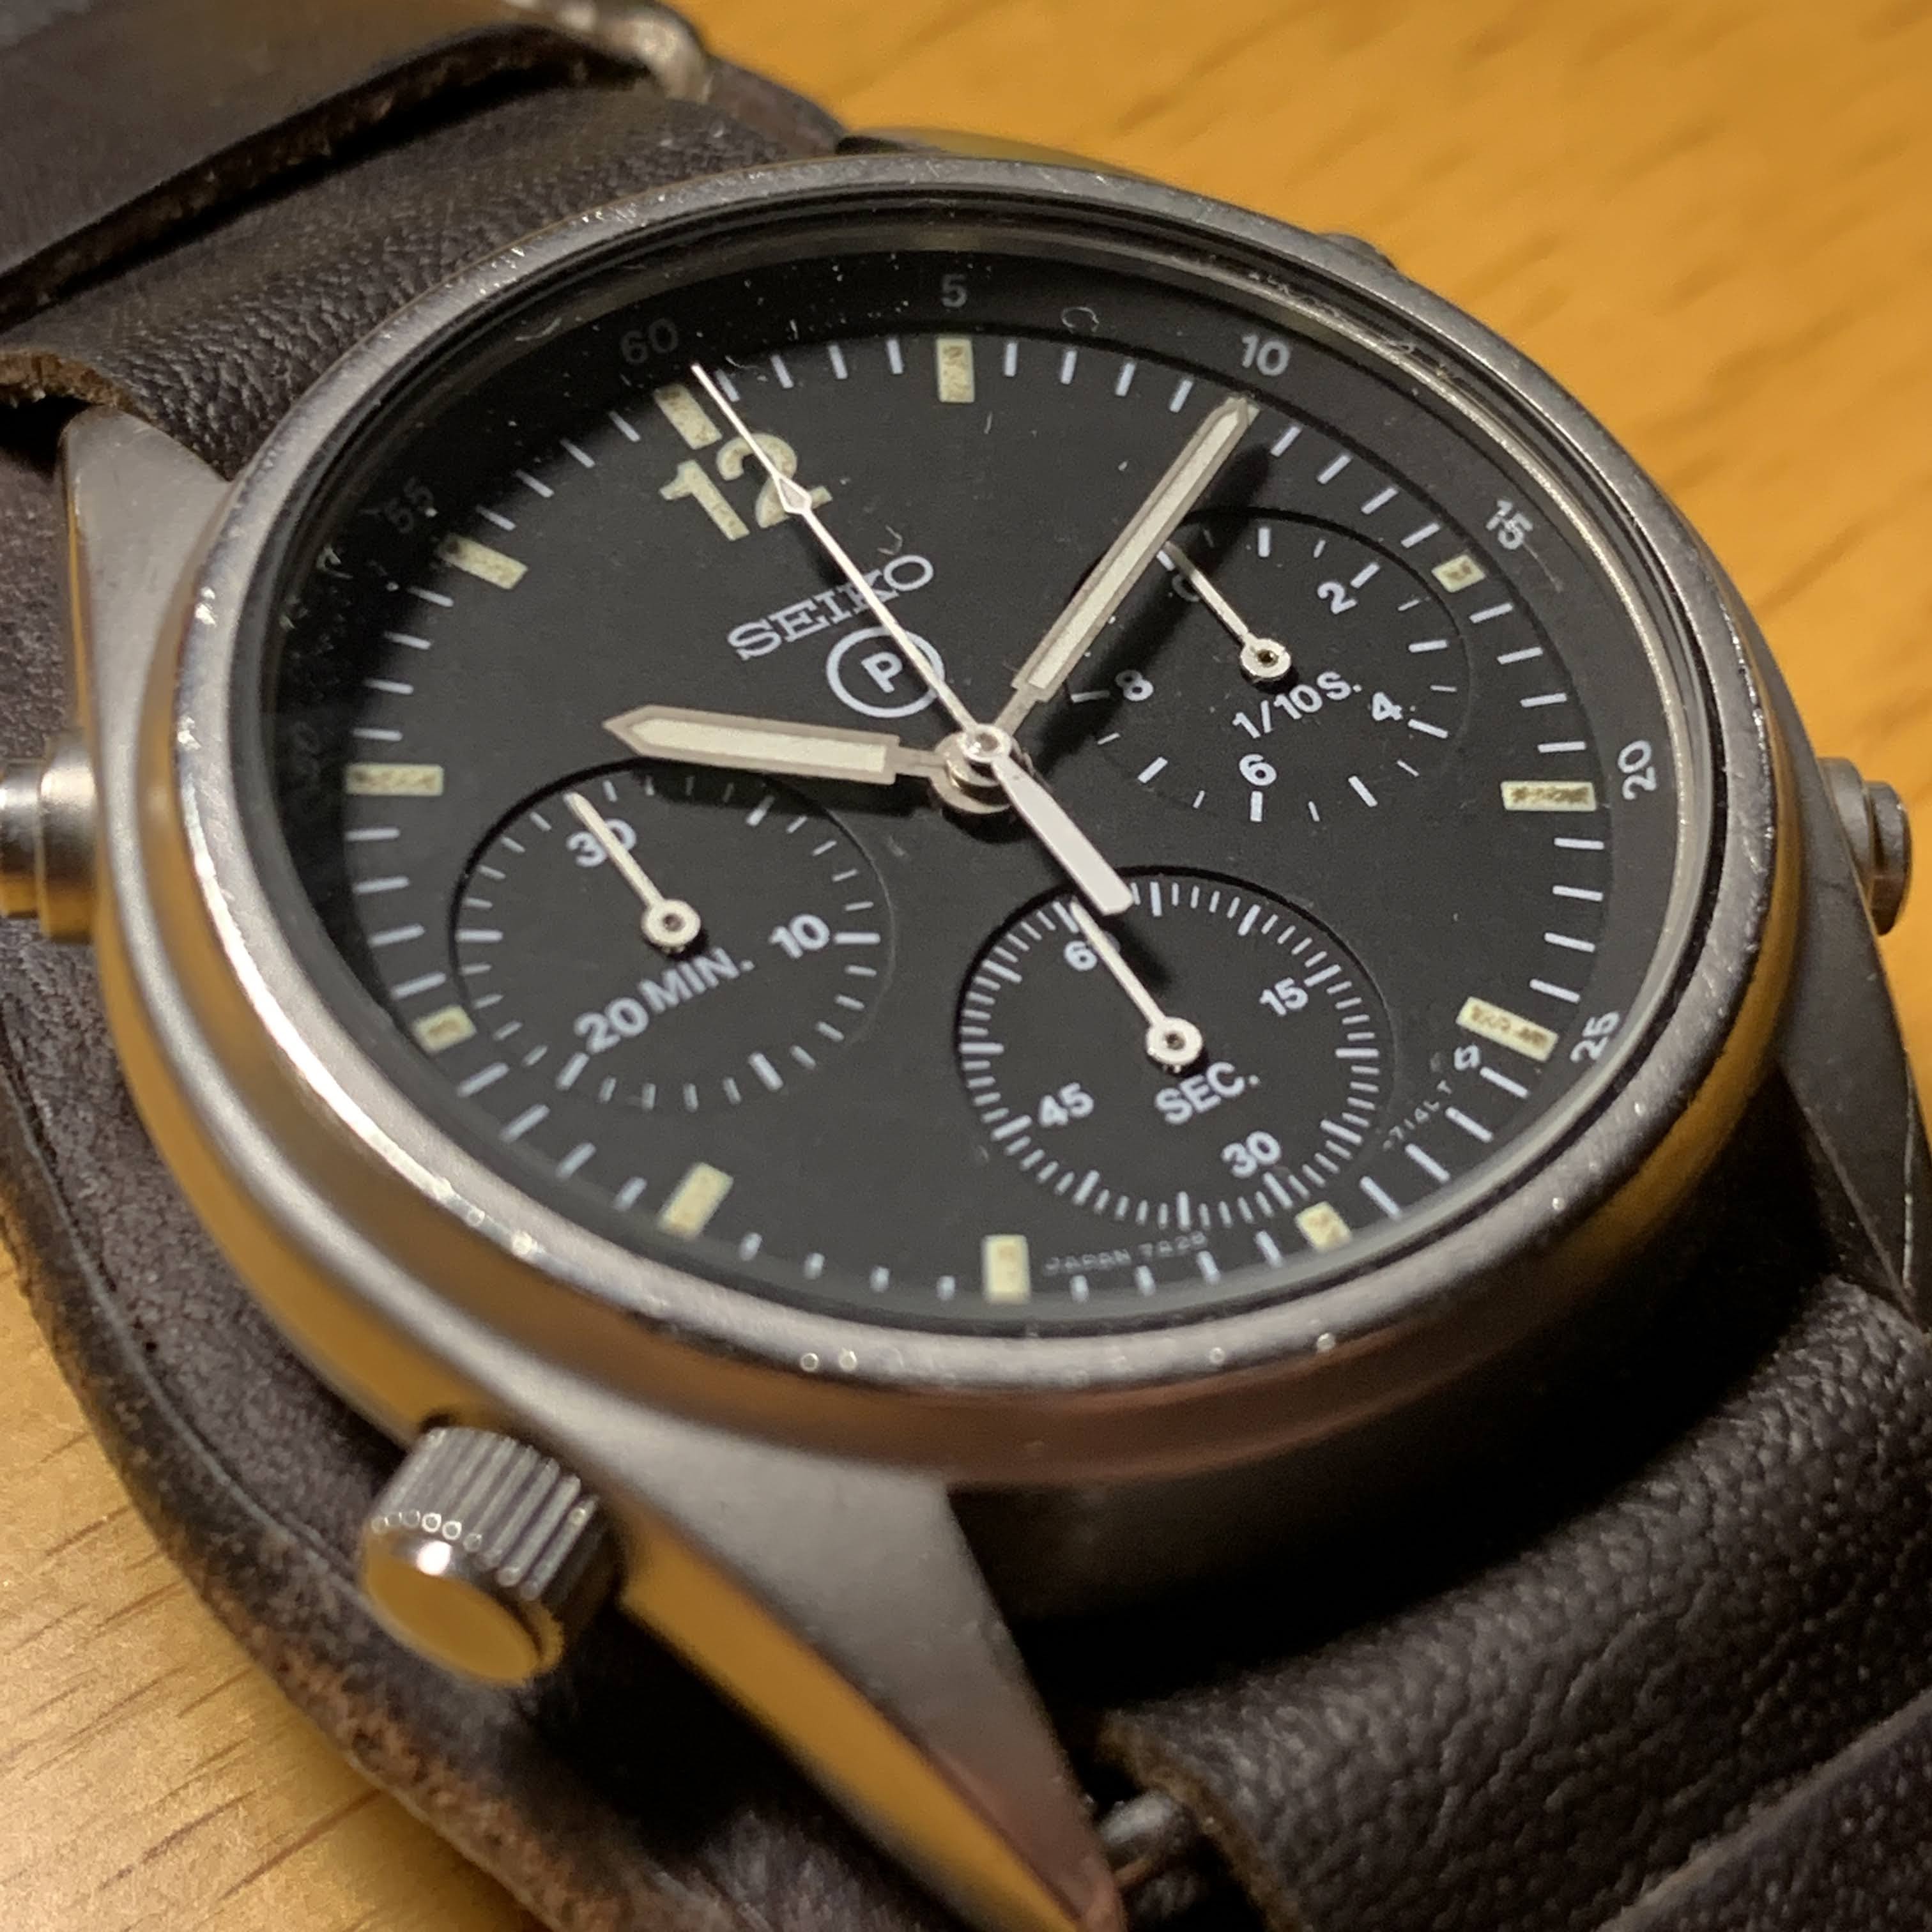 Harry's Vintage Seiko Blog: Seiko Gen 1 (1st Generation) 7A28-7120 Royal  Air Force flight crew issued military analog chronograph